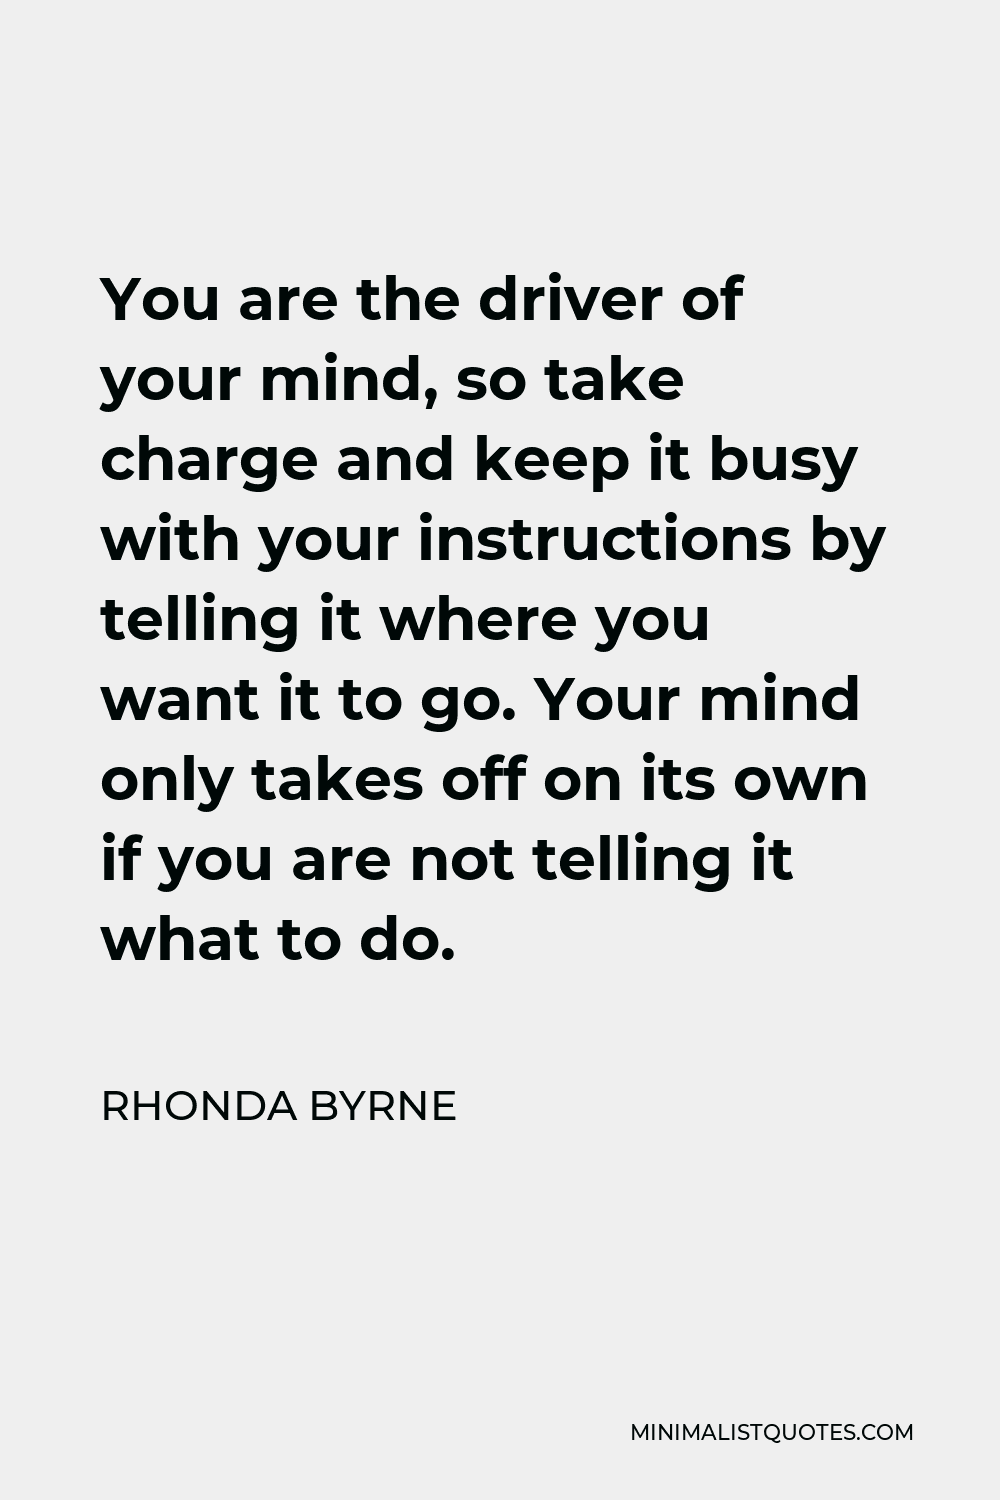 Rhonda Byrne Quote - You are the driver of your mind, so take charge and keep it busy with your instructions by telling it where you want it to go. Your mind only takes off on its own if you are not telling it what to do.